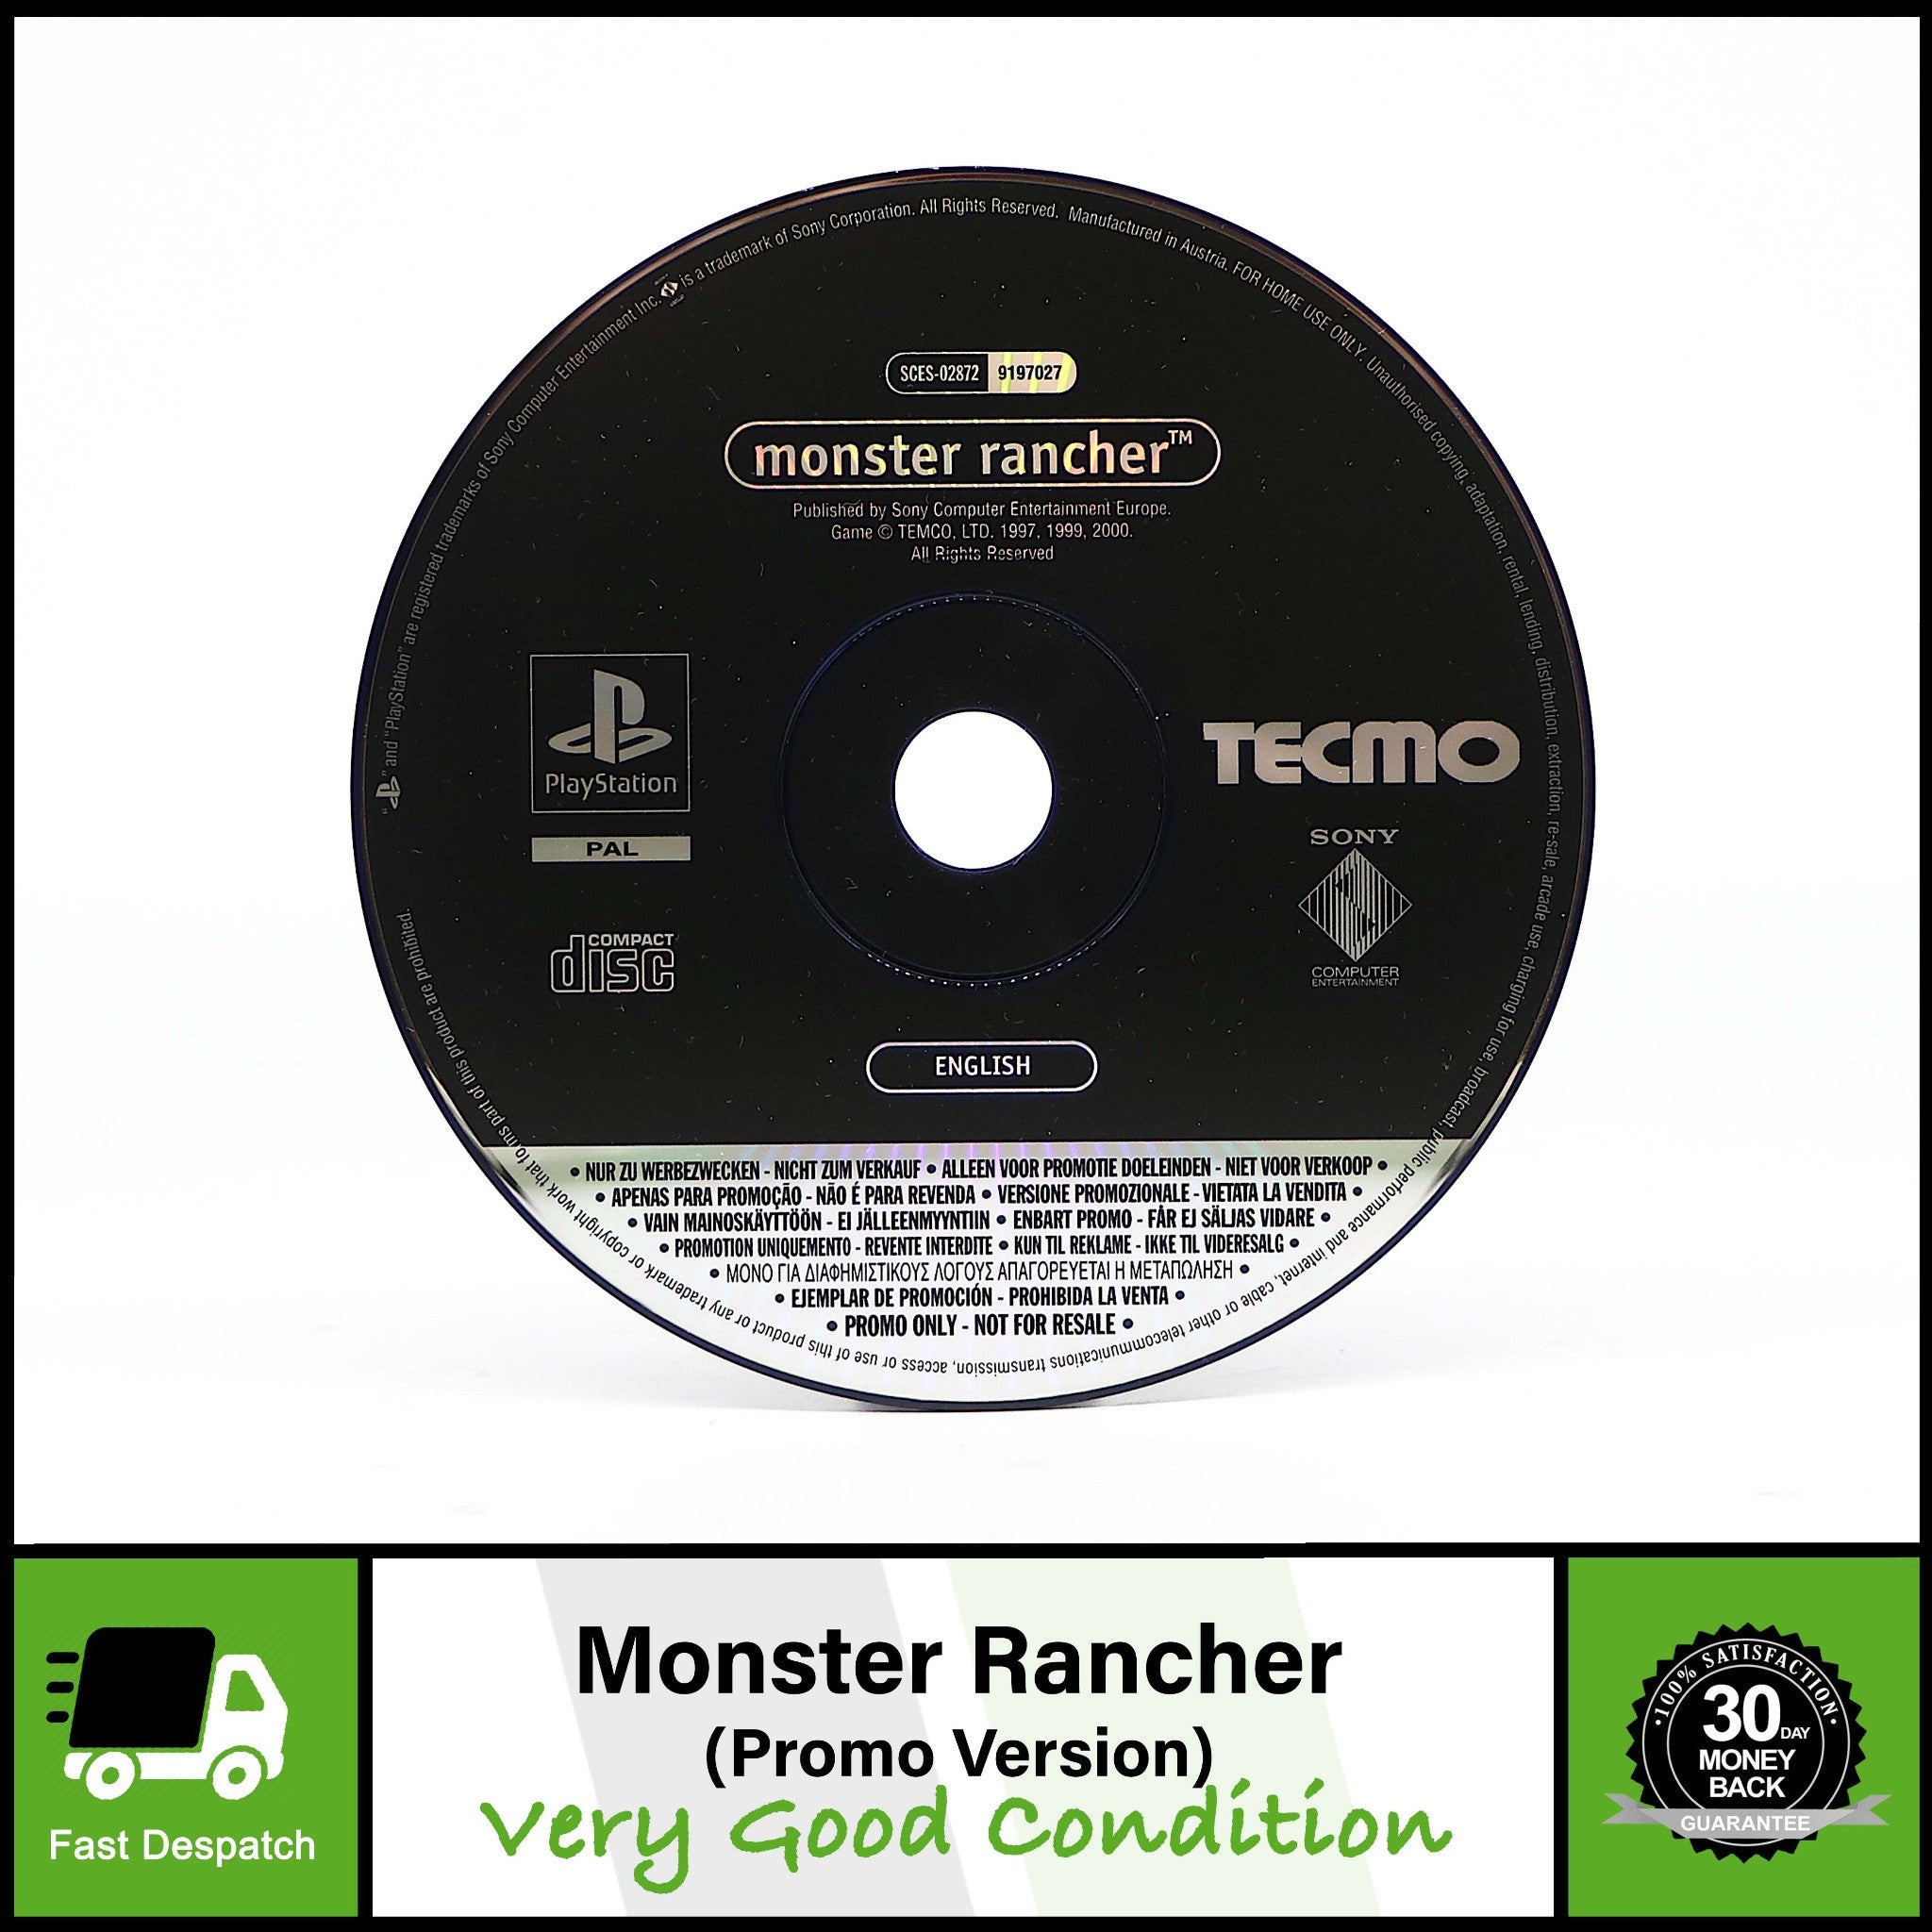 Monster Rancher | Sony PS1 PSOne Game | Promo Version | Very Good Condition!